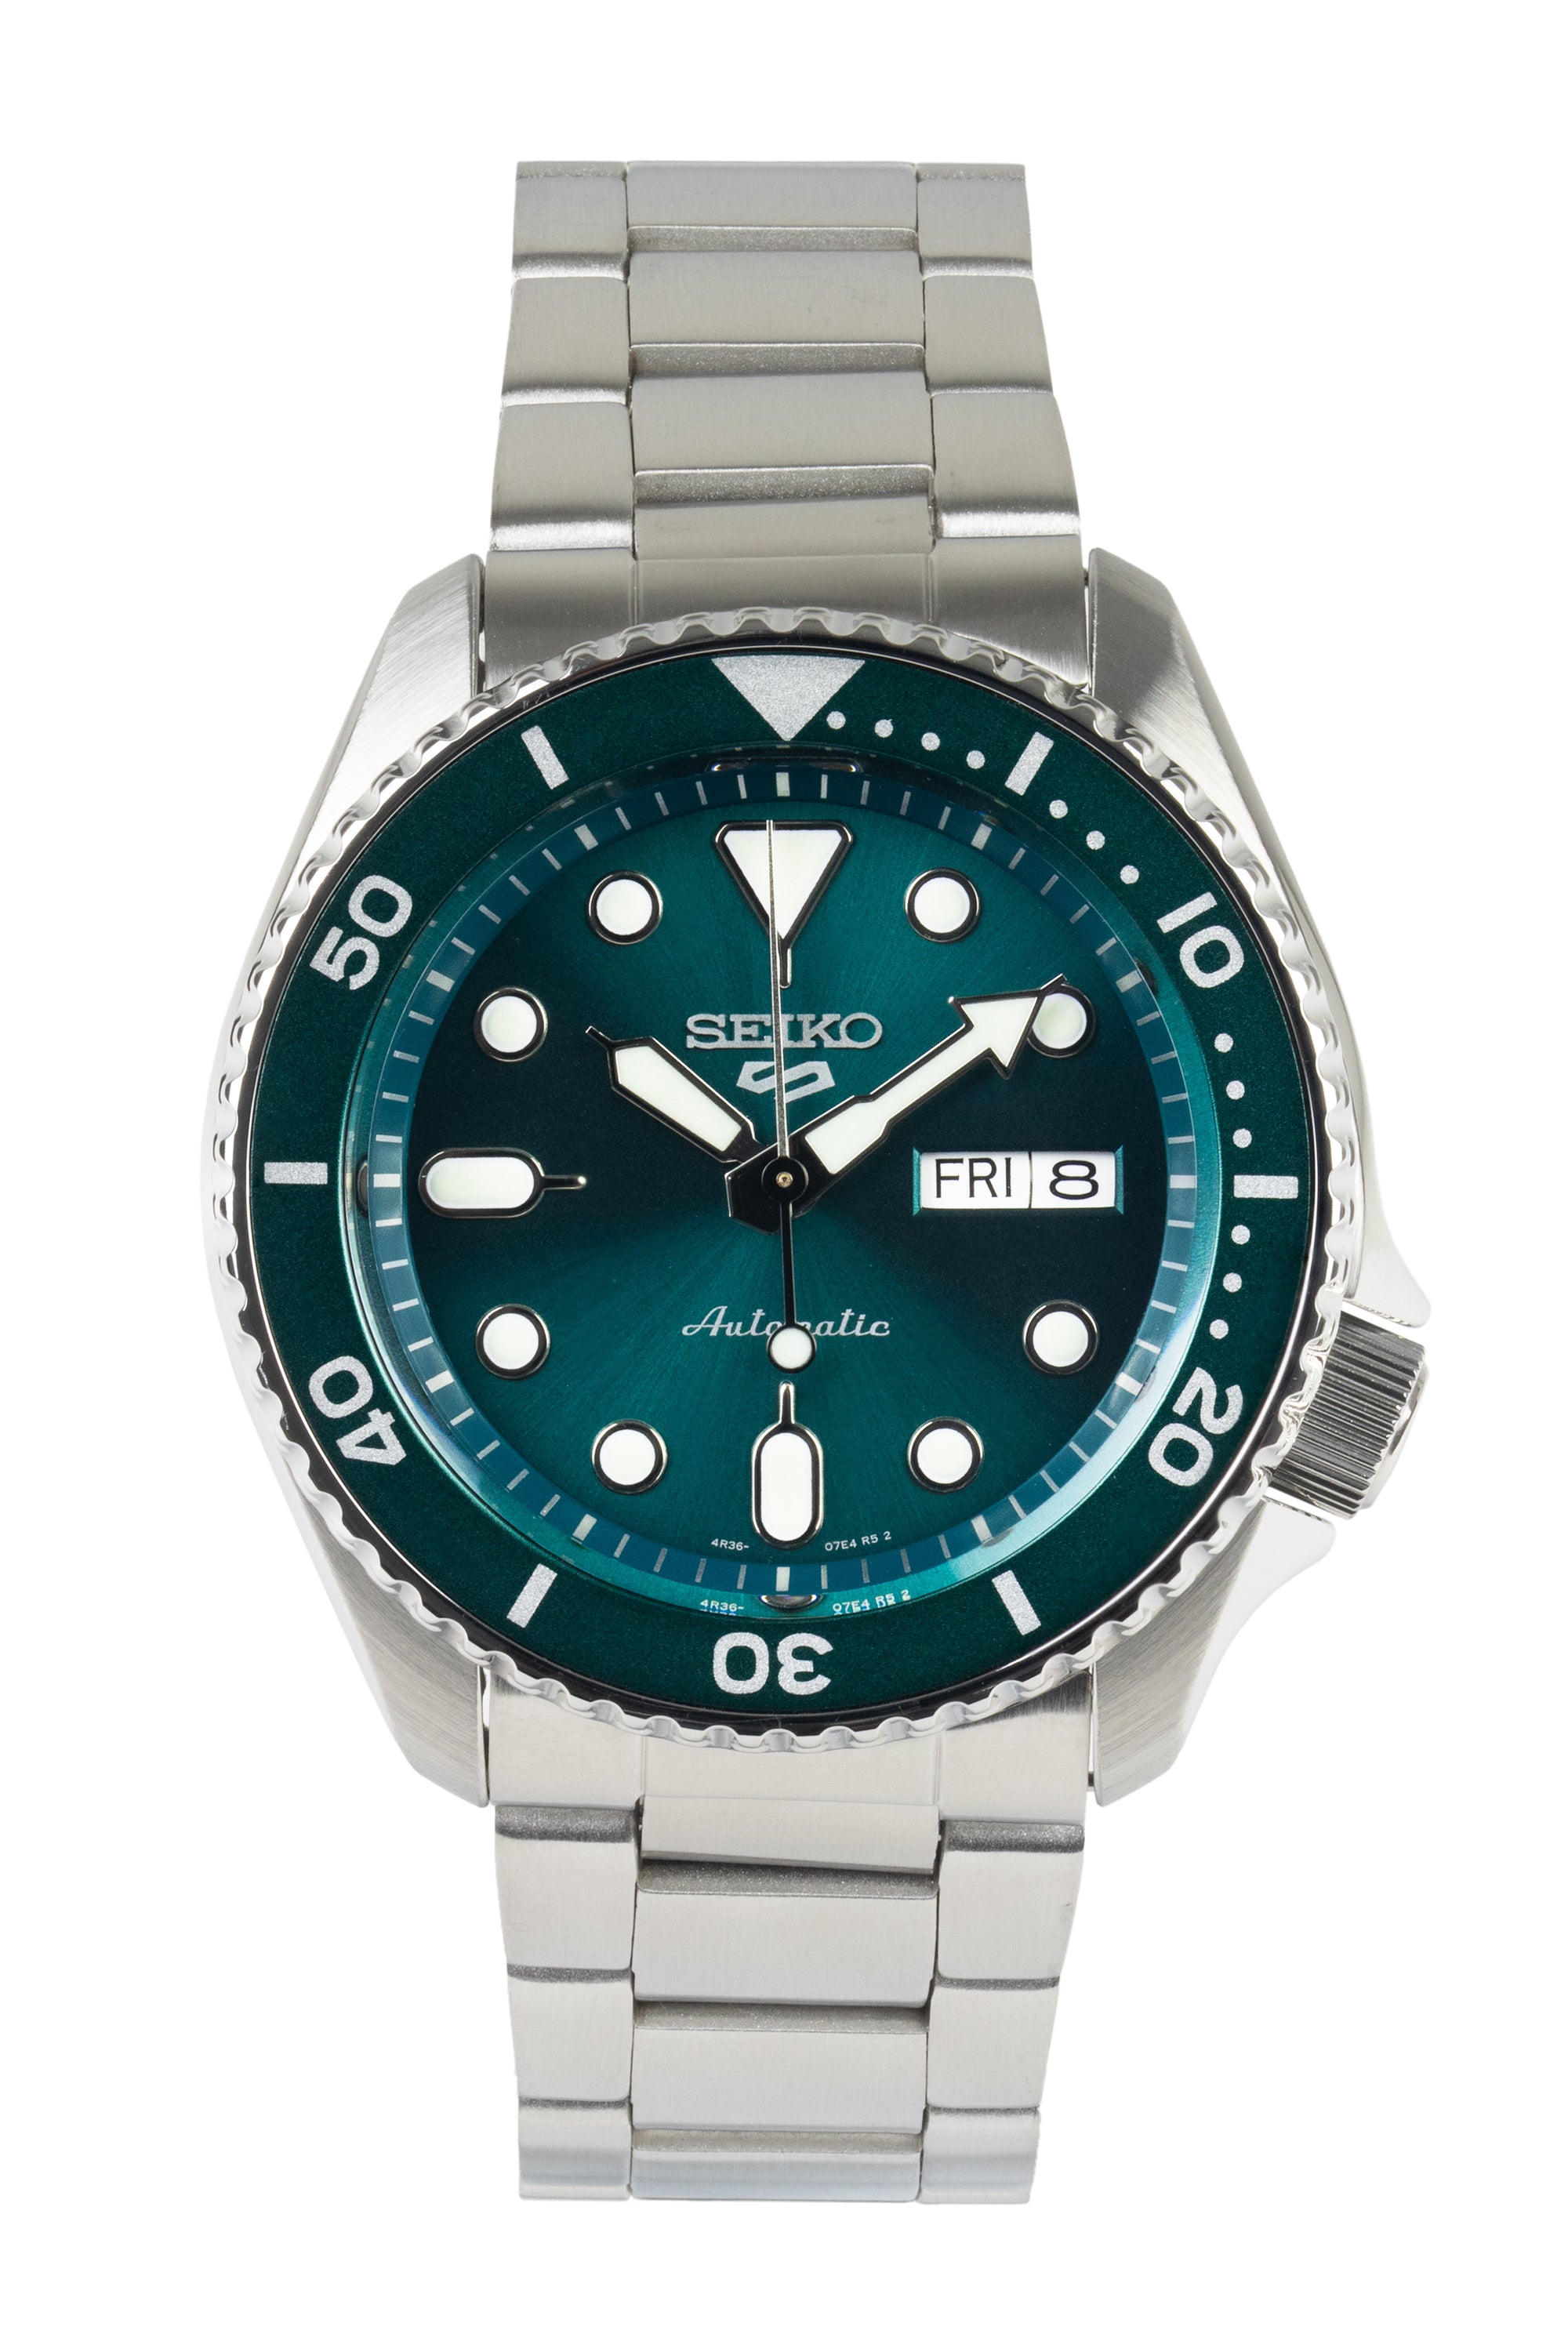 SEIKO 5 Sports Automatic Watch | 42mm | Watch Obsession